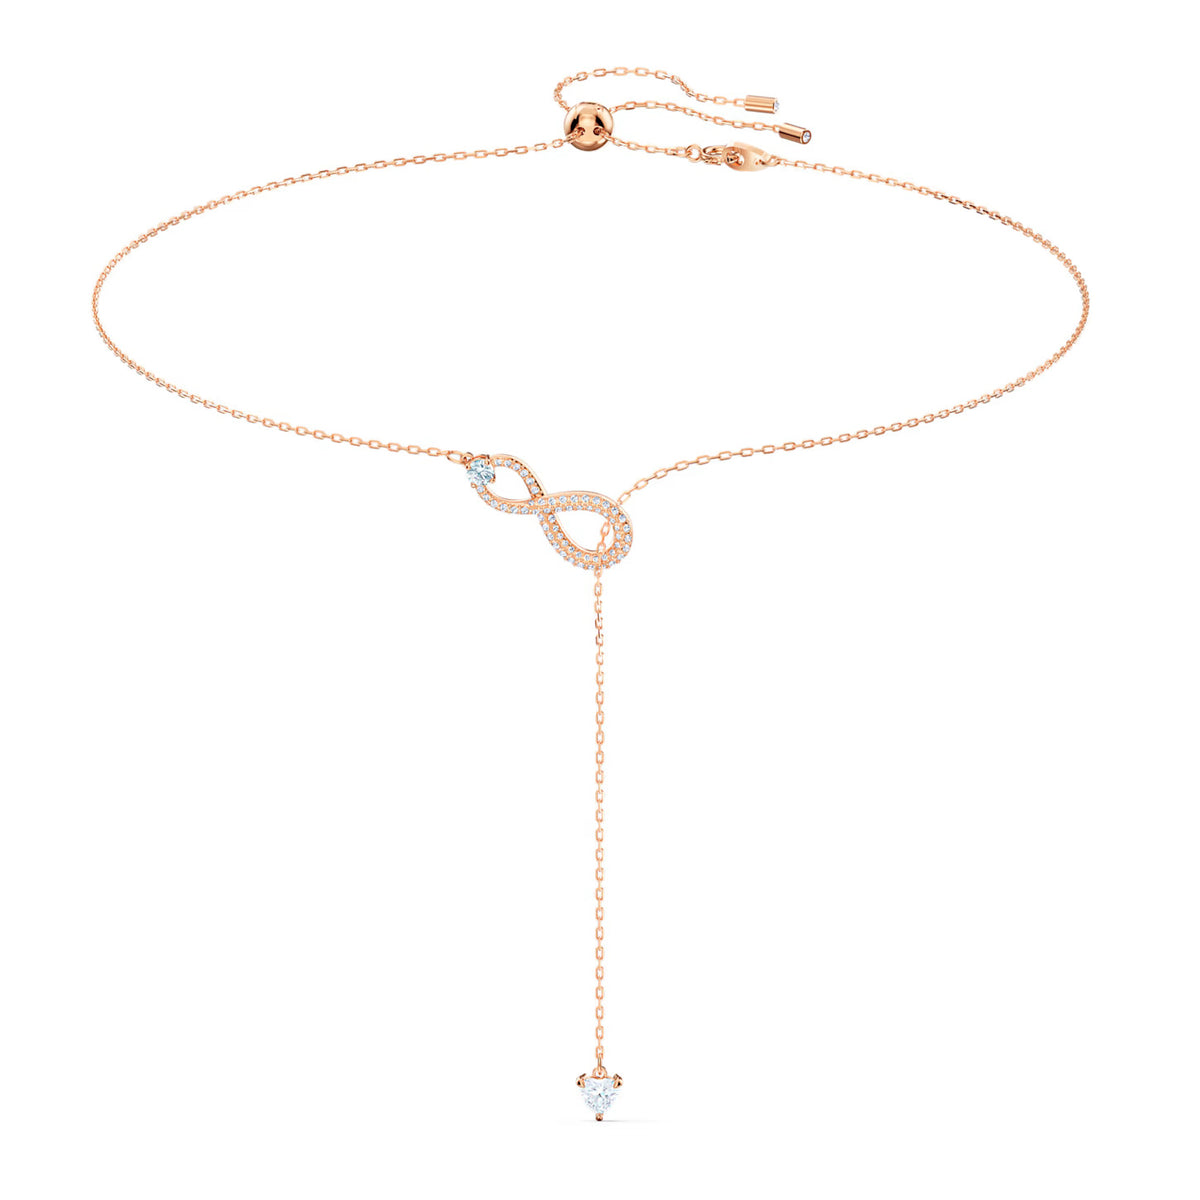 Infinity Y necklace Infinity, White, Rose gold-tone plated | Mix Mix Style [Hot Seller]